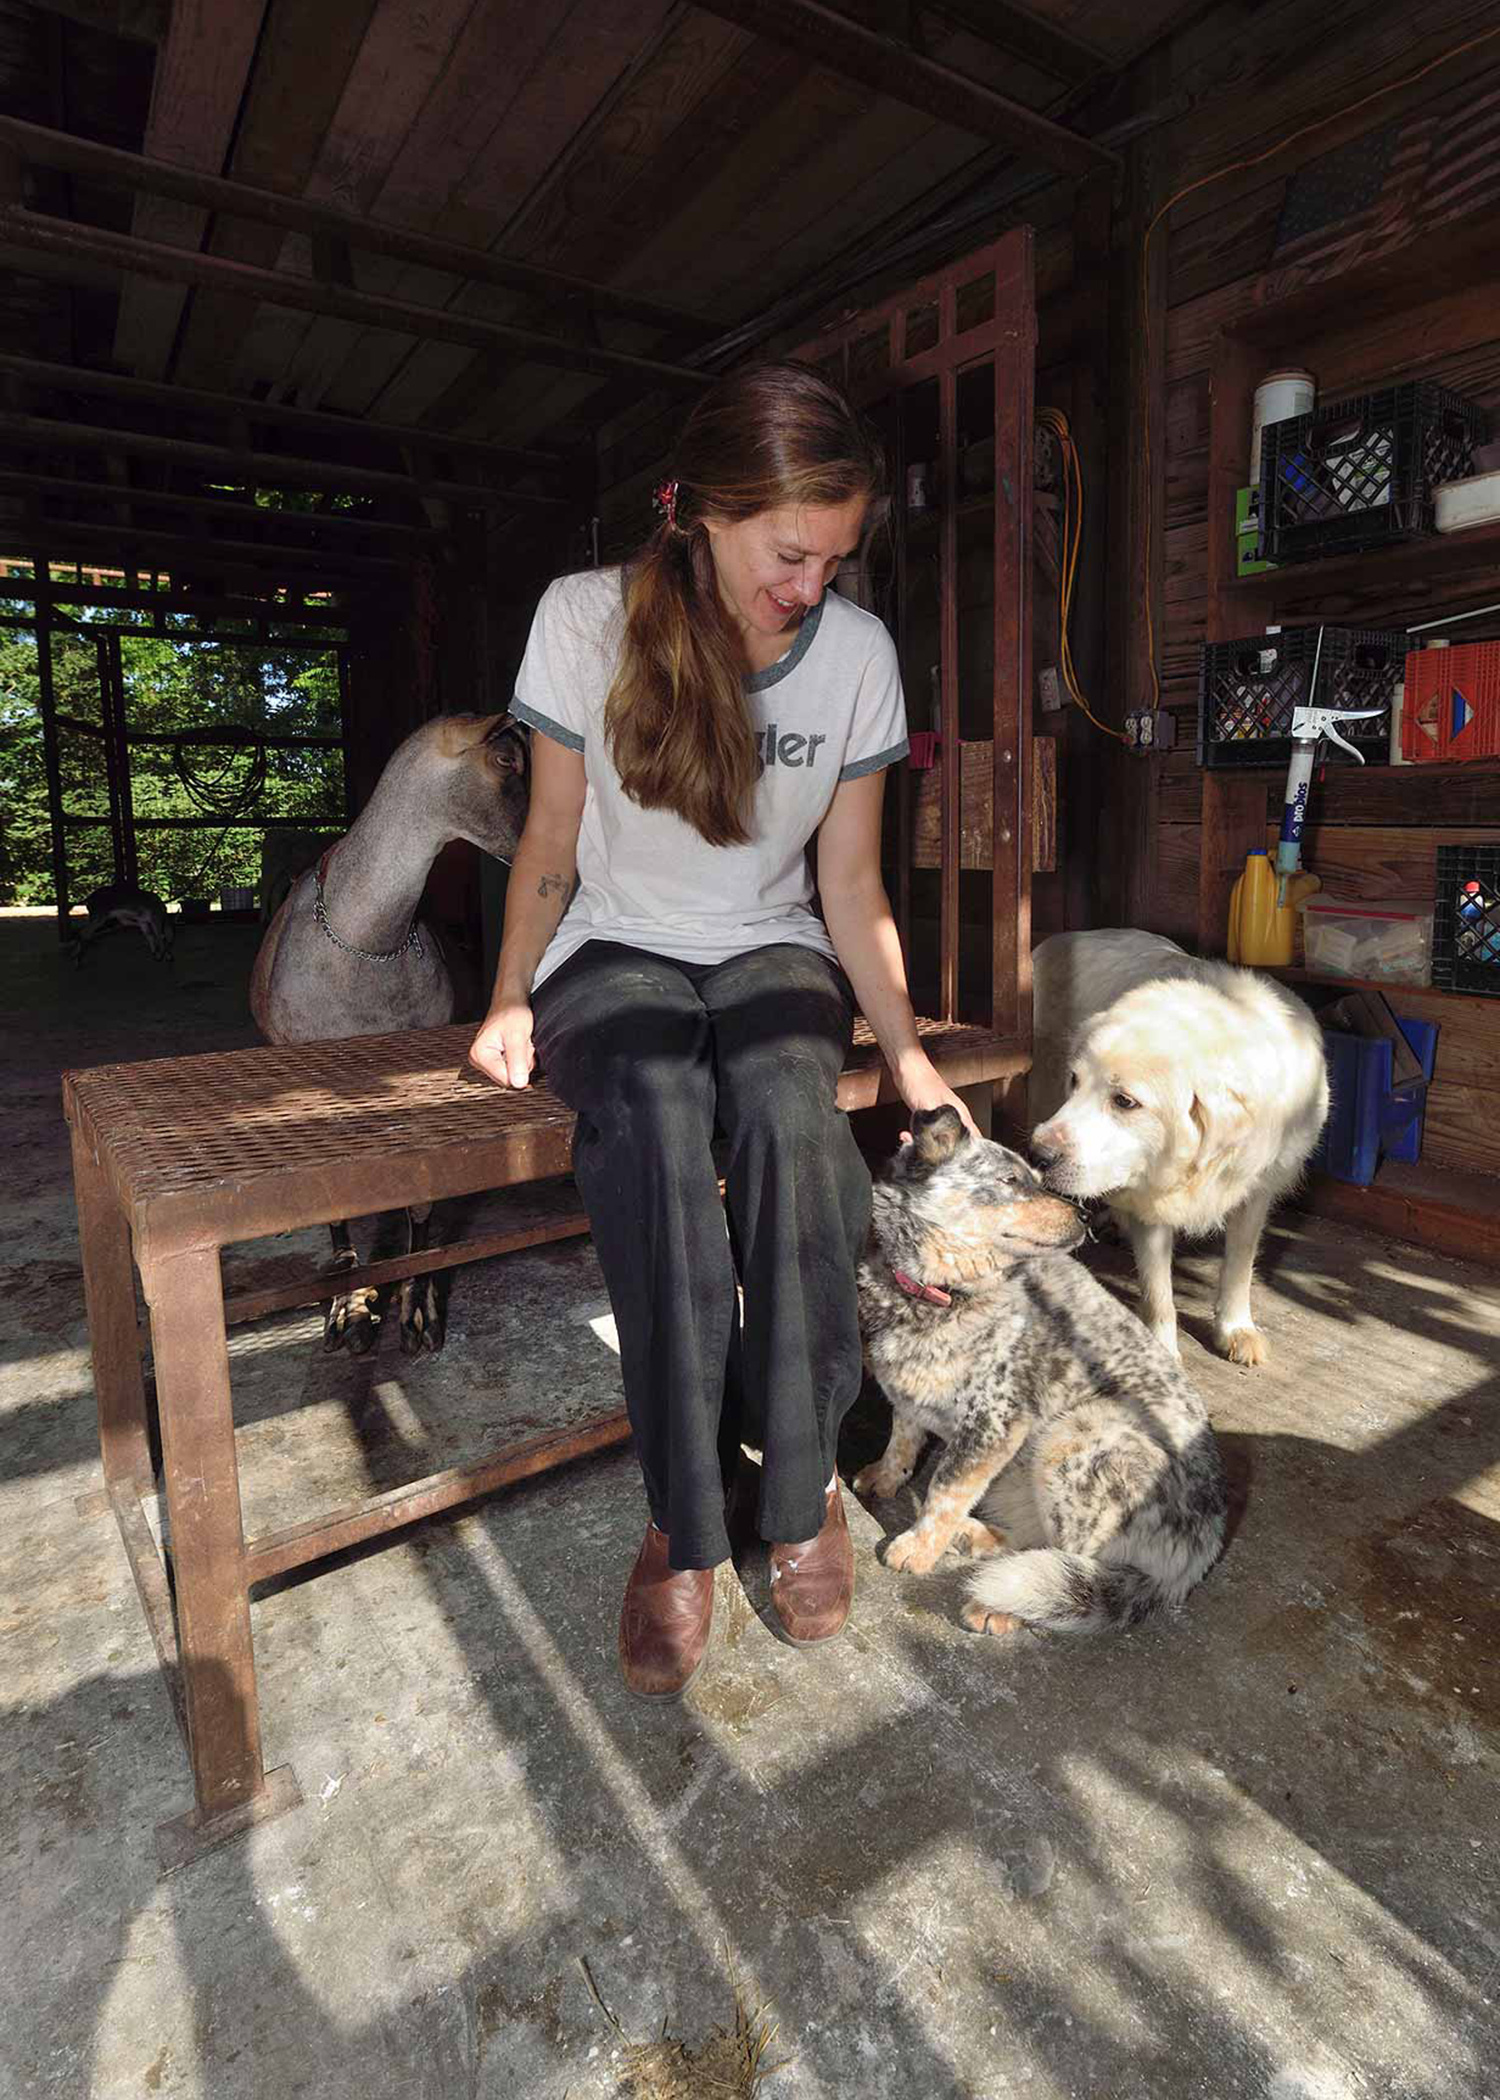 A woman with a white shirt, black pants, and brown shoes sits on a brown, metal bench inside a barn. On the right, there are two dogs. A light dog with black and brown spots sits next to the woman, white a white dog stands next to the dog sitting down. Behind the woman is a white and brown goat. 